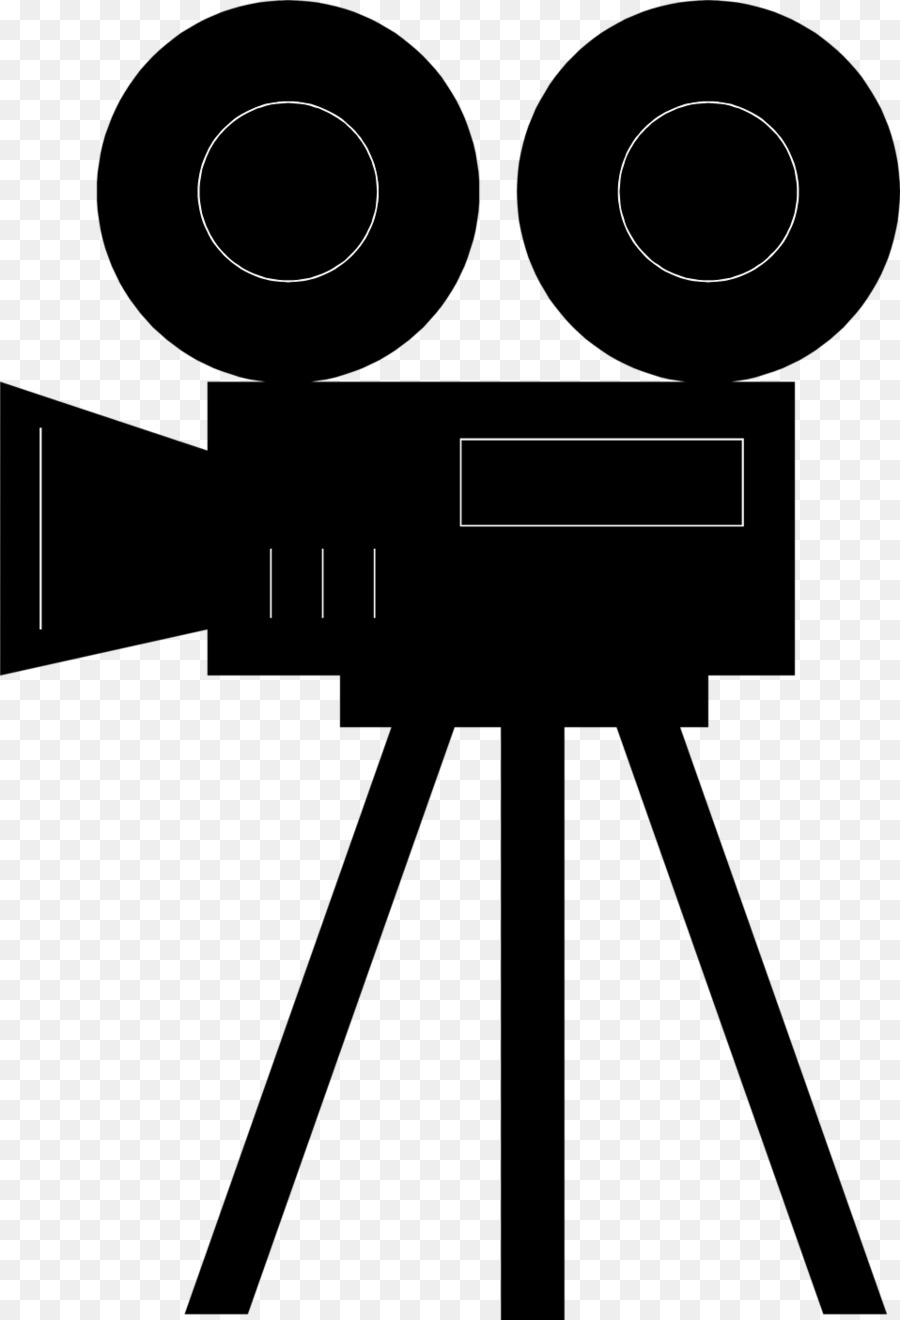 Photographic film Photography Clip art - video camera png download - 958*1405 - Free Transparent Photographic Film png Download.